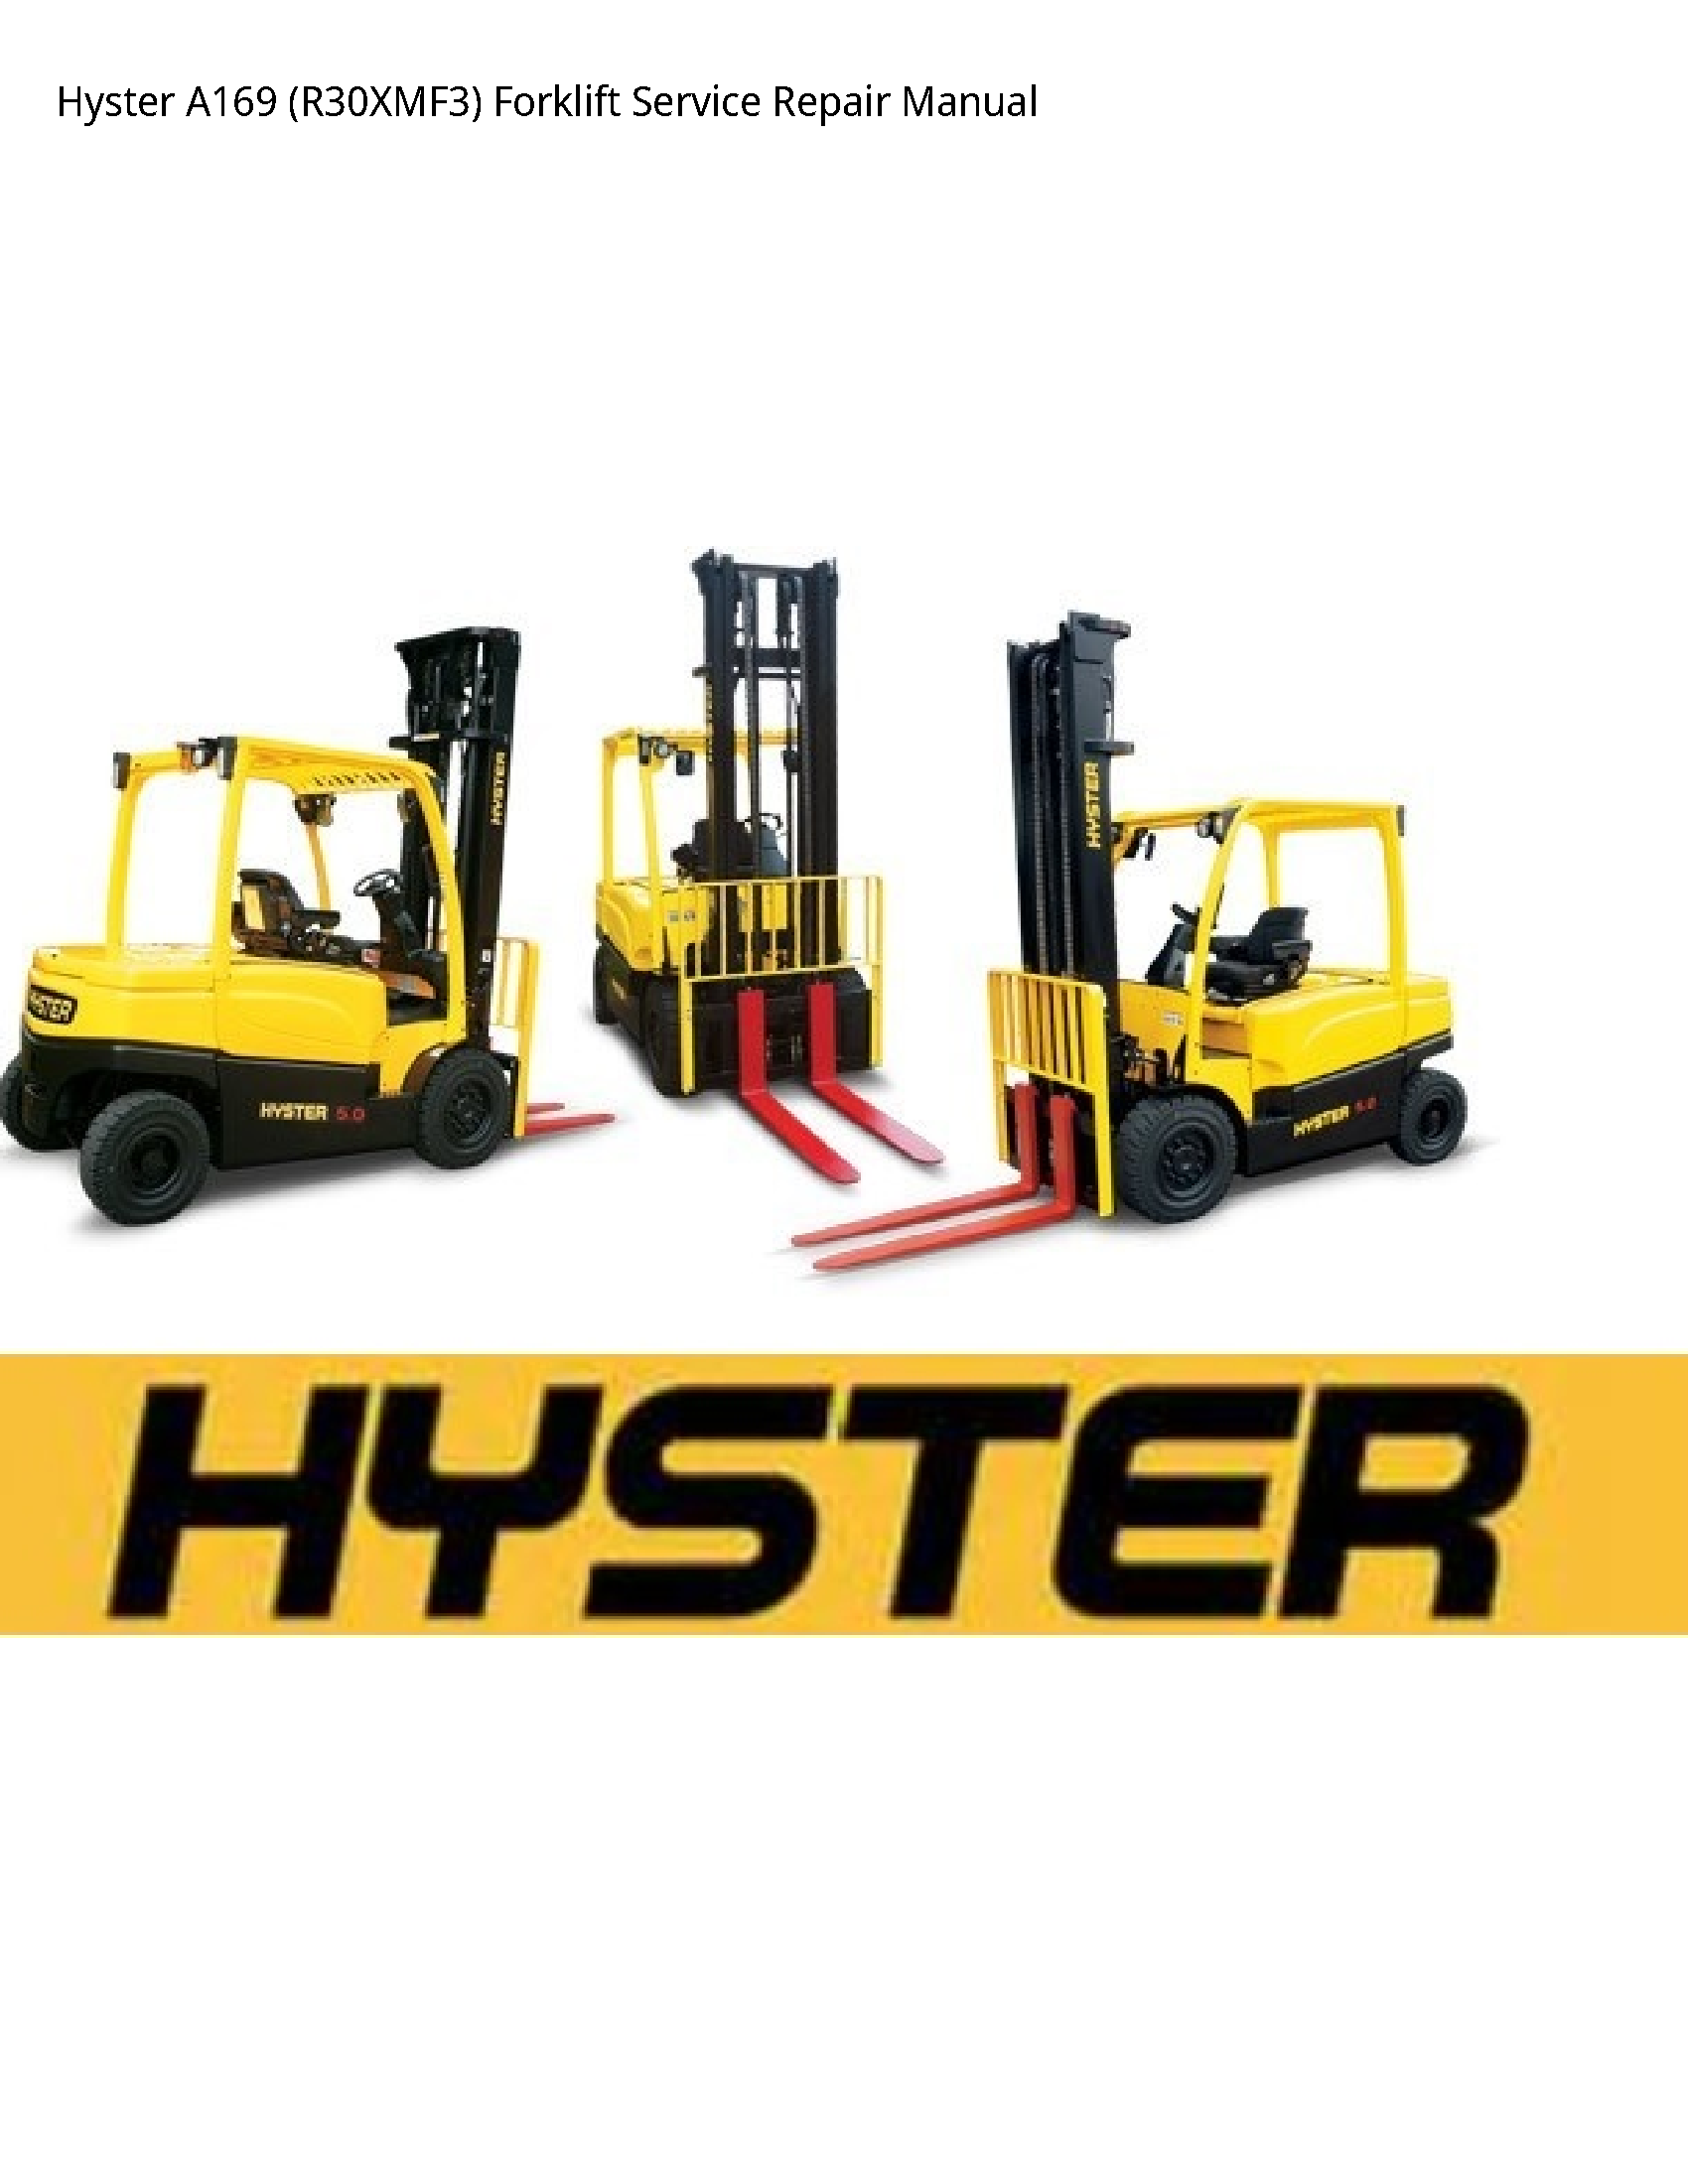 Hyster A169 Forklift manual